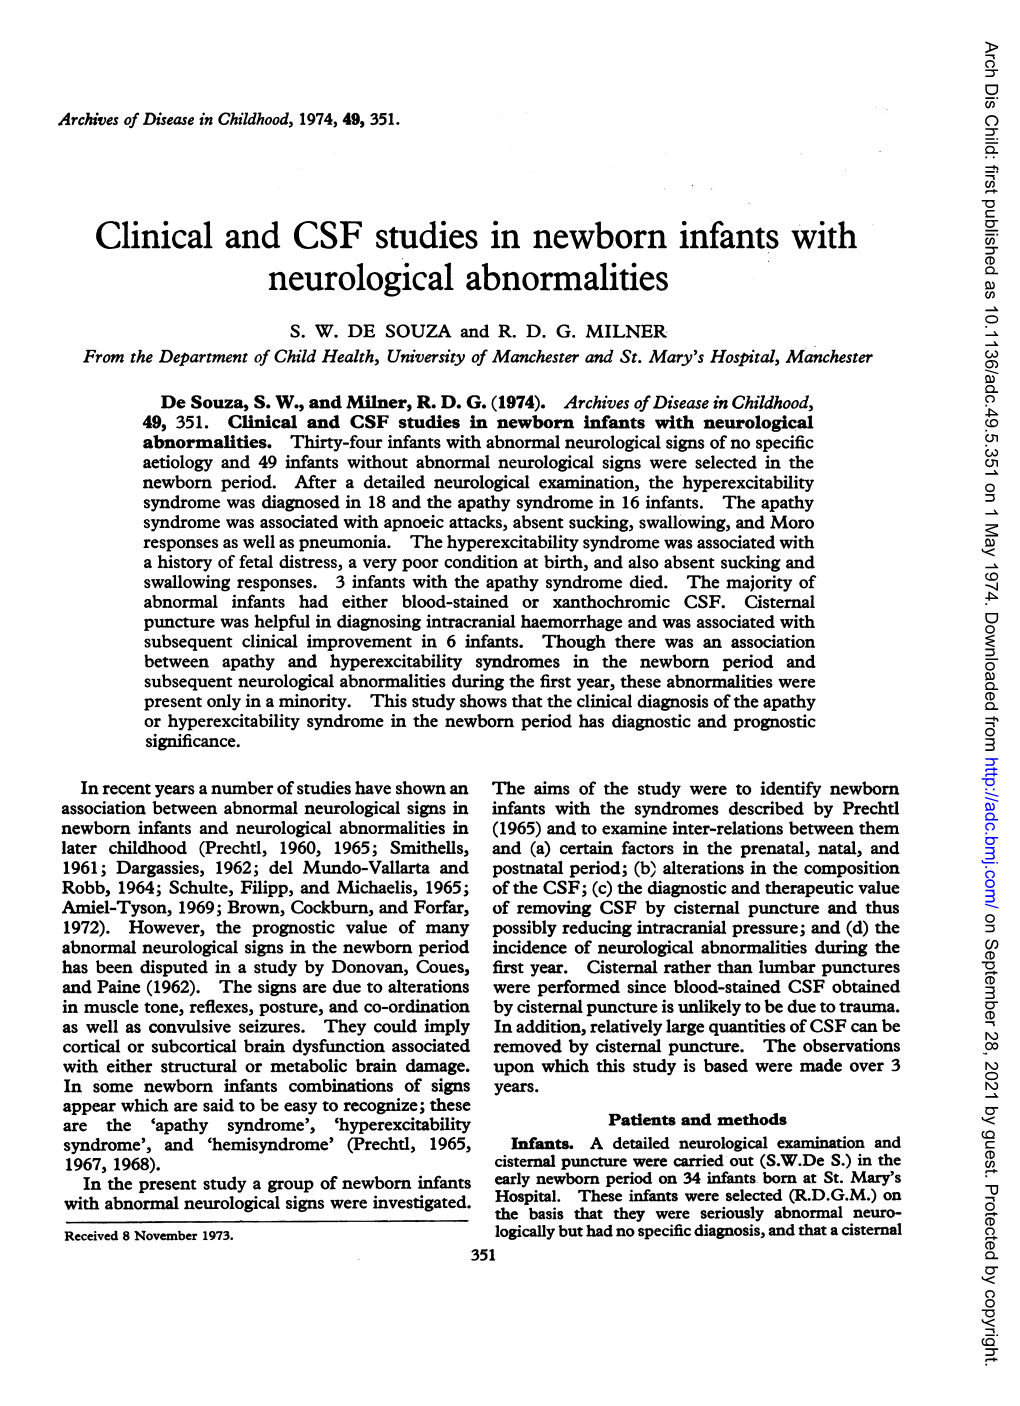 Clinical and CSF Studies in Newborn Infants with Neurological Abnormalities